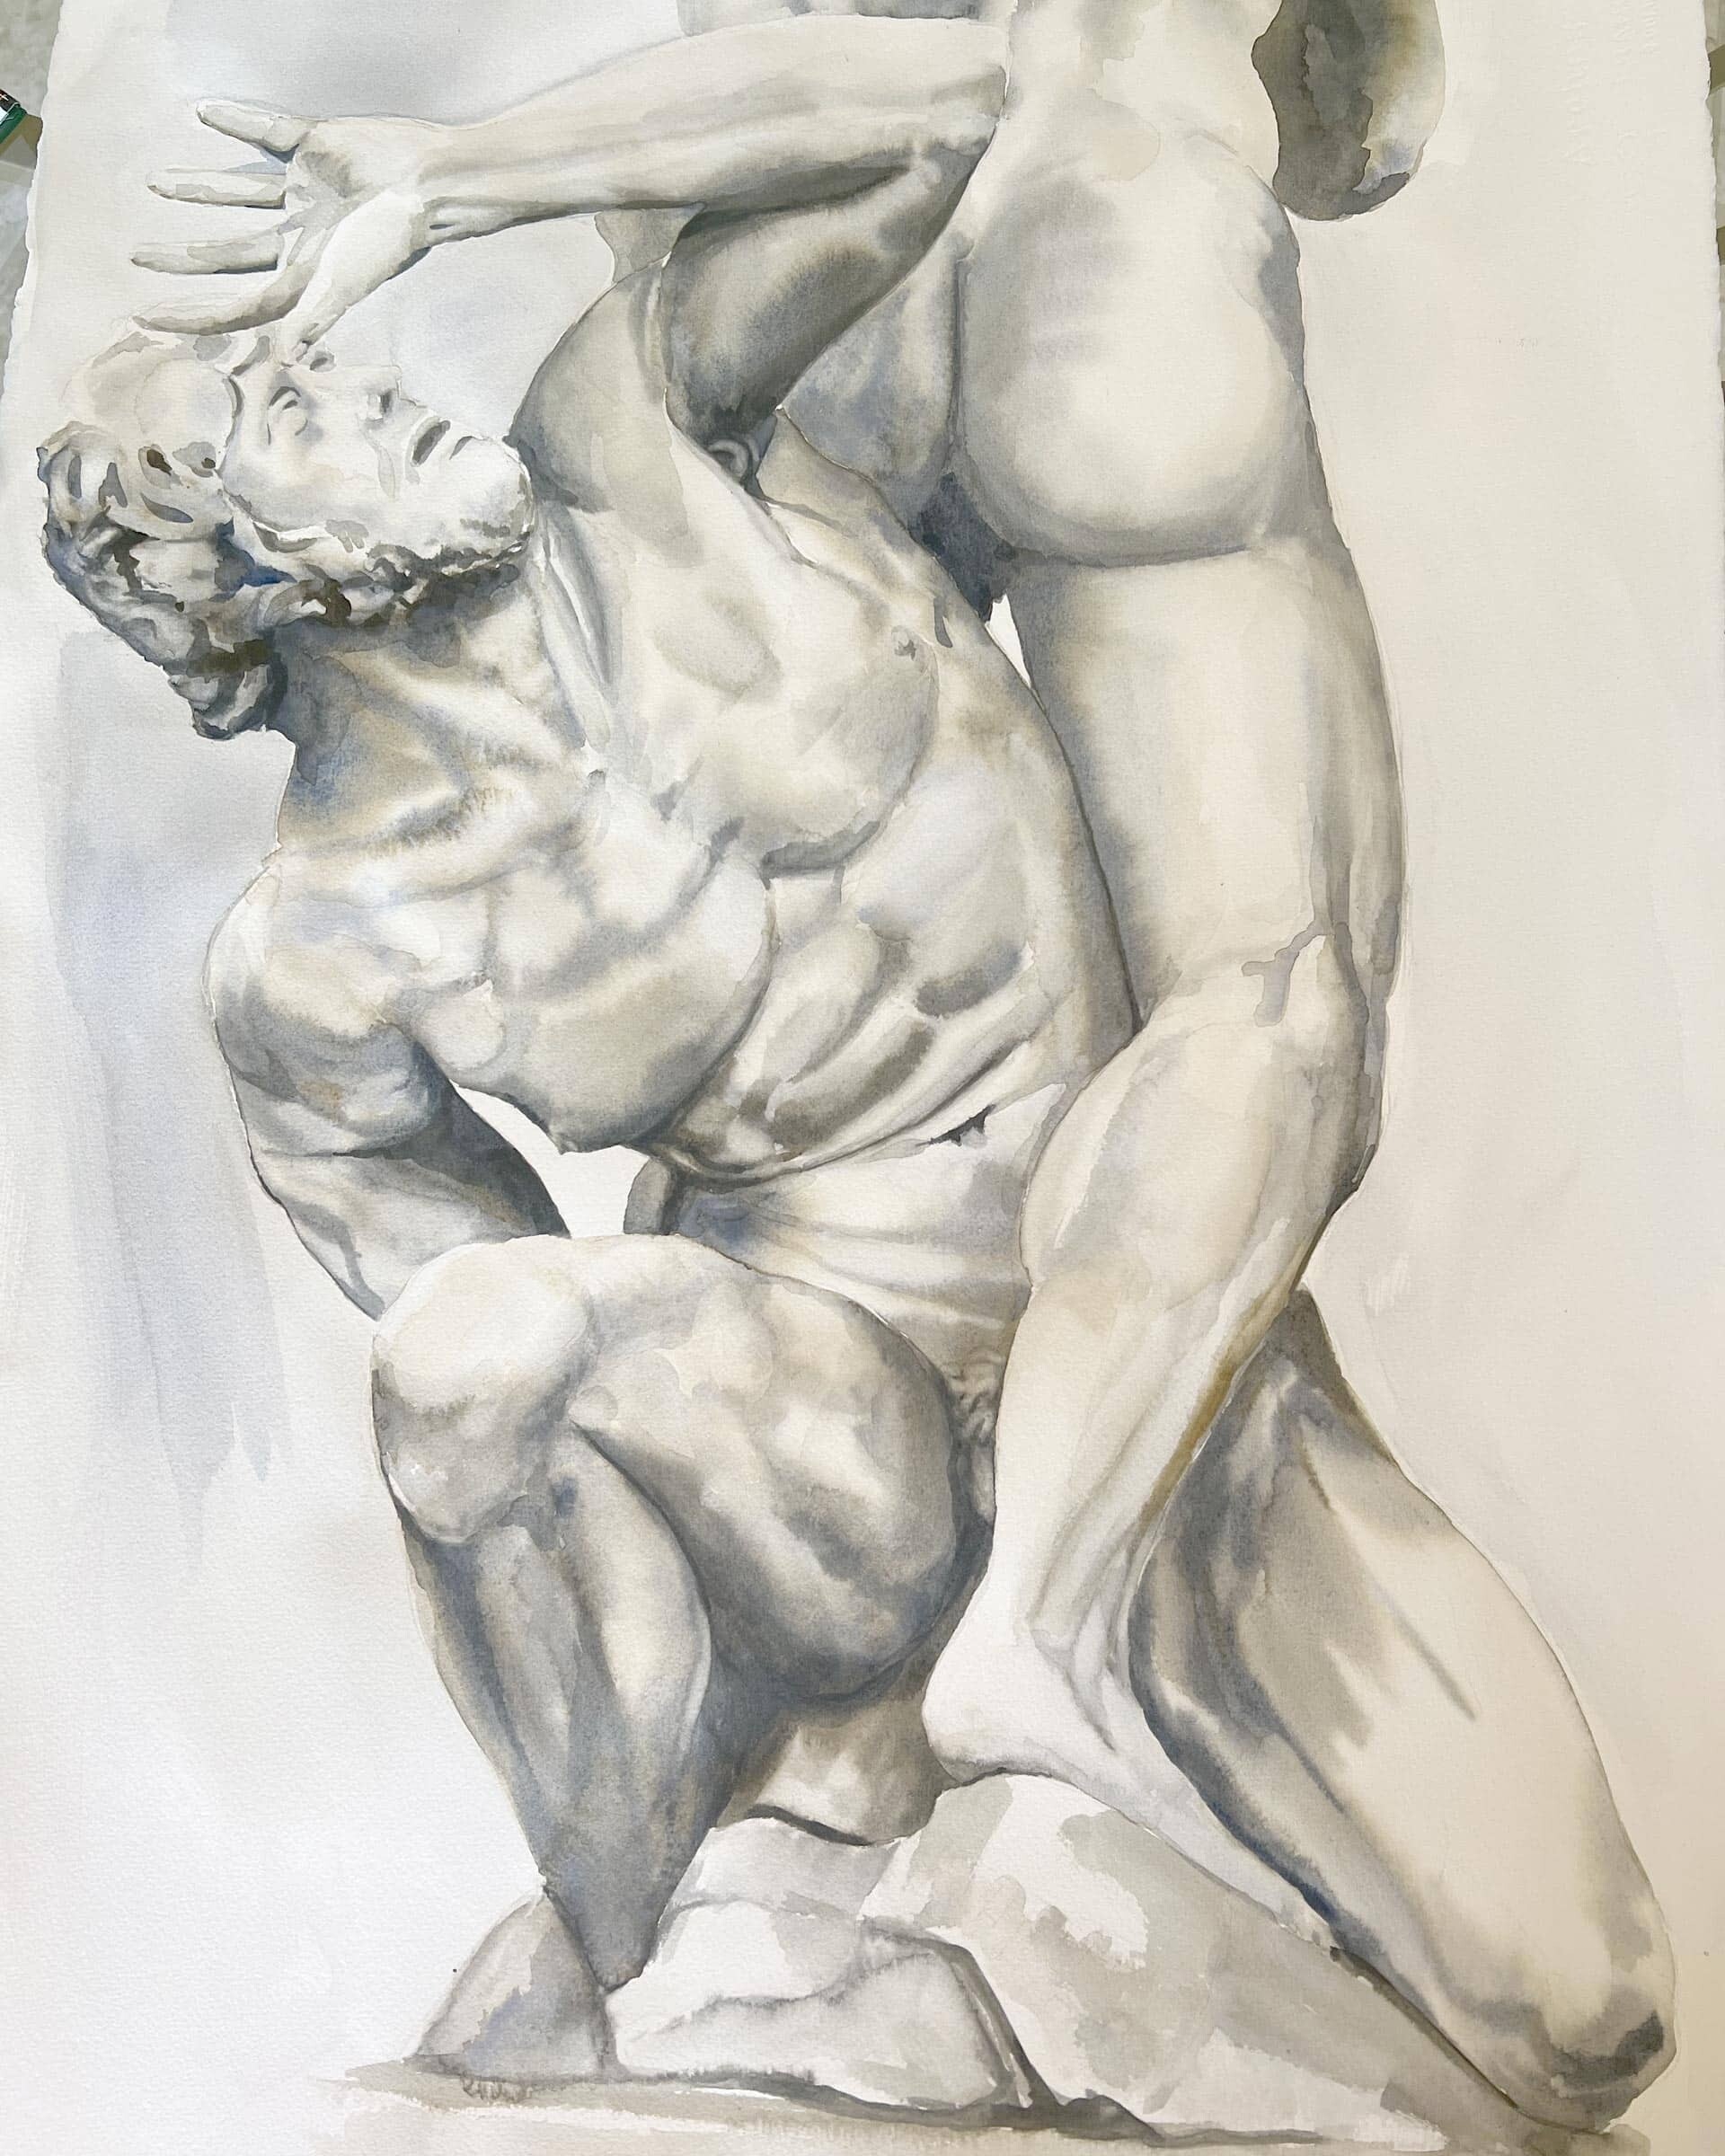 Two original watercolor paintings 'Il Ratto delle Sabine' by Alex Righetto, each measuring 20 x 30 inches, part of the Renaissance Collection, intricately portraying the richness of the Renaissance period.